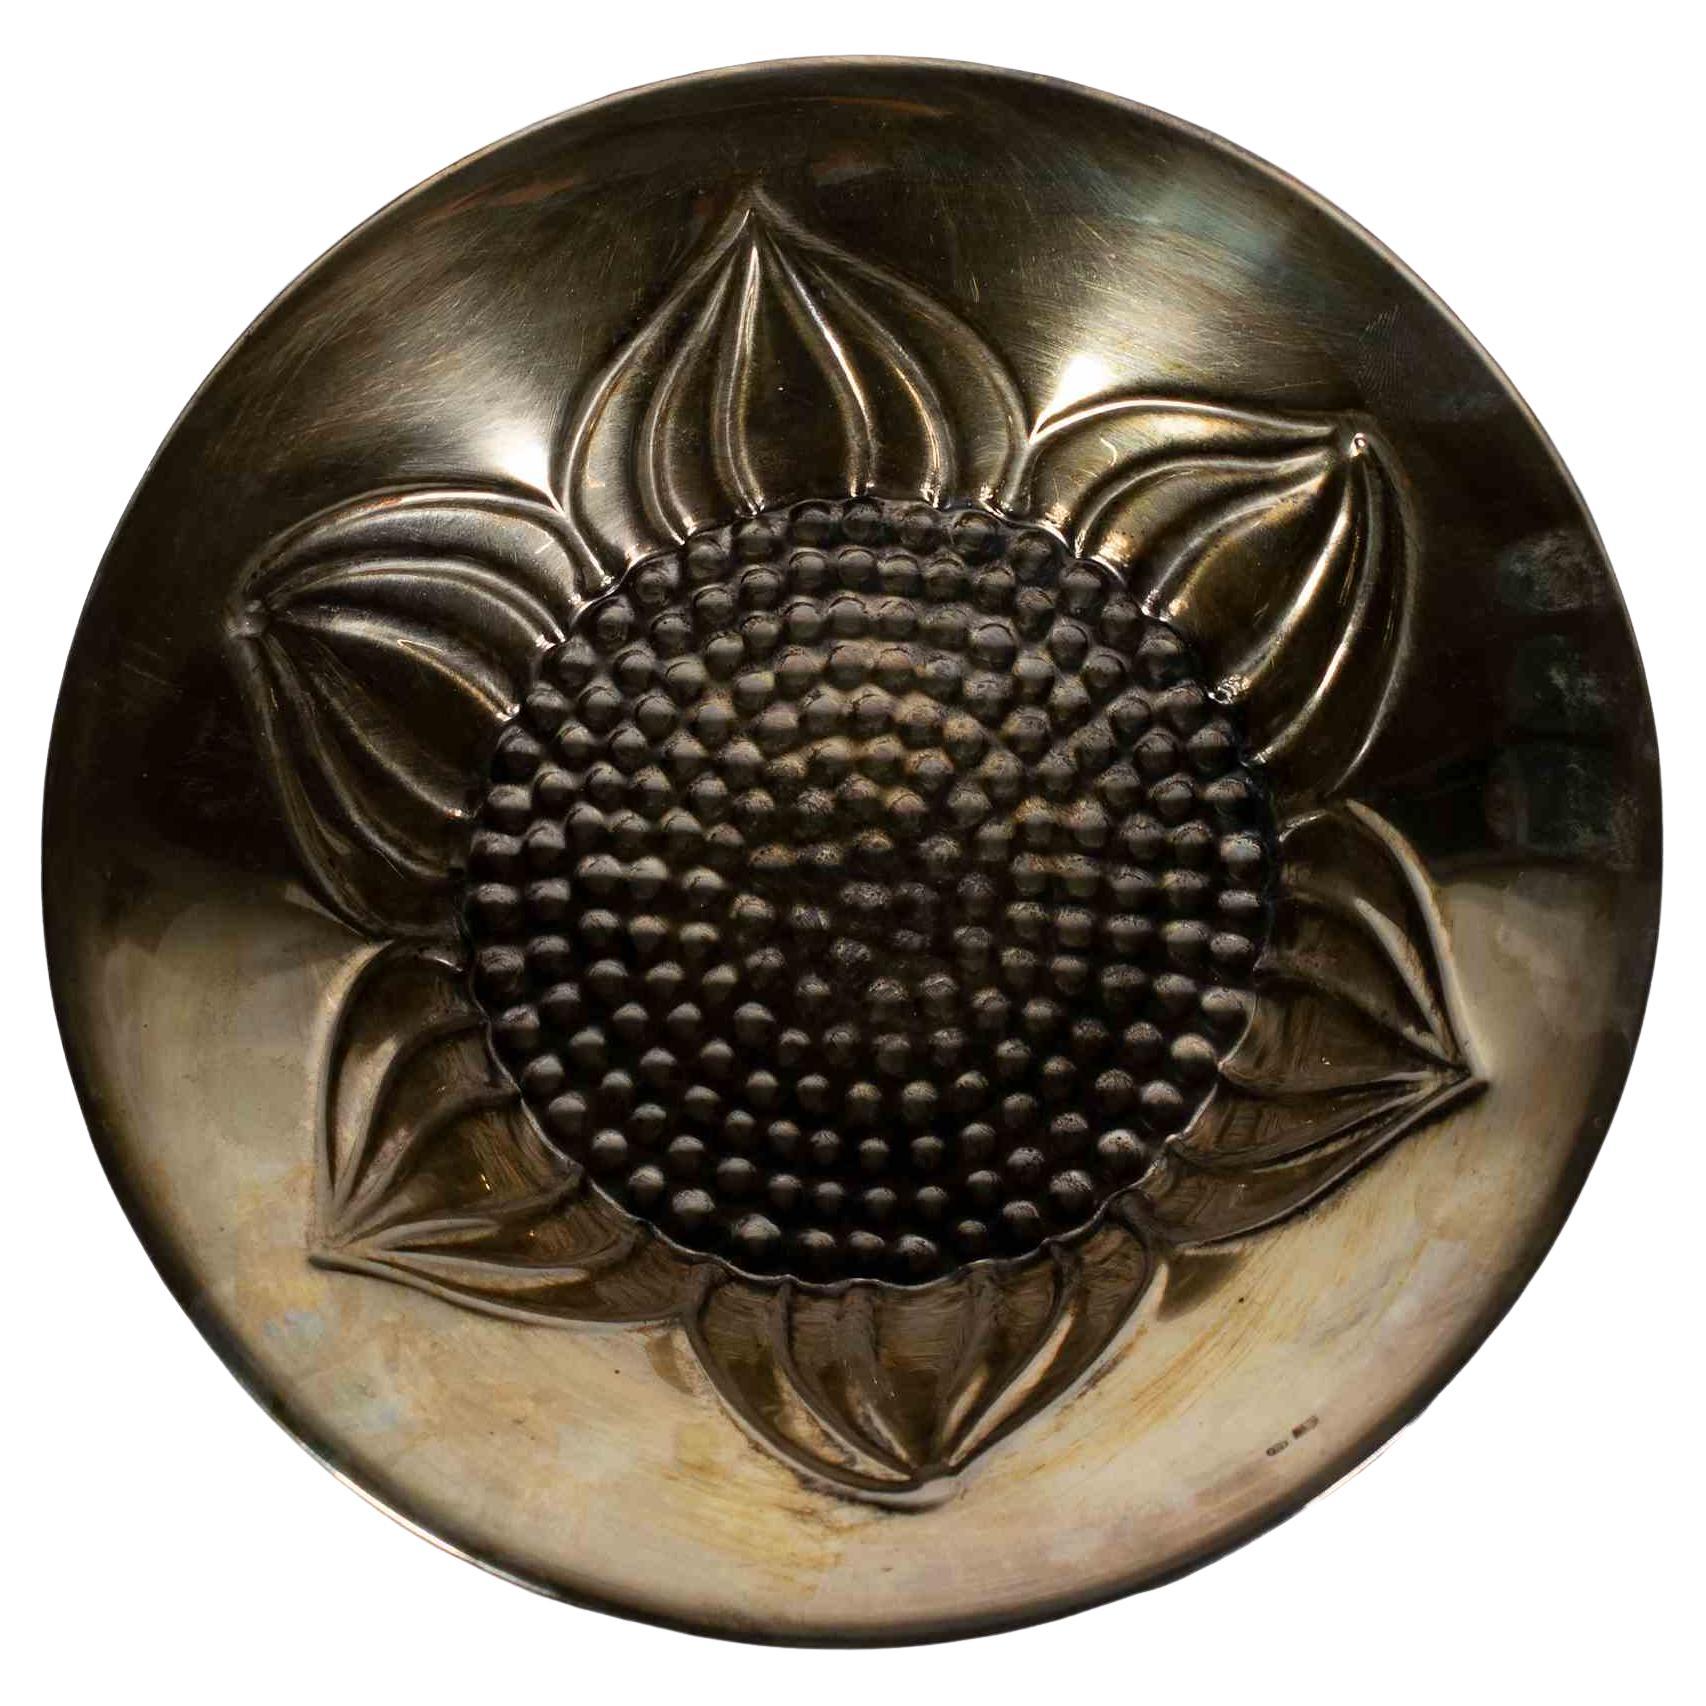 Silver centrepiece with sunflower is a precious decorative object realized in the Mid-20th Century.

Very elegant centrepiece made at the beginning of 1900s.

Finely decorated with a very elegant sunflower shape decoration.

Give a touch of